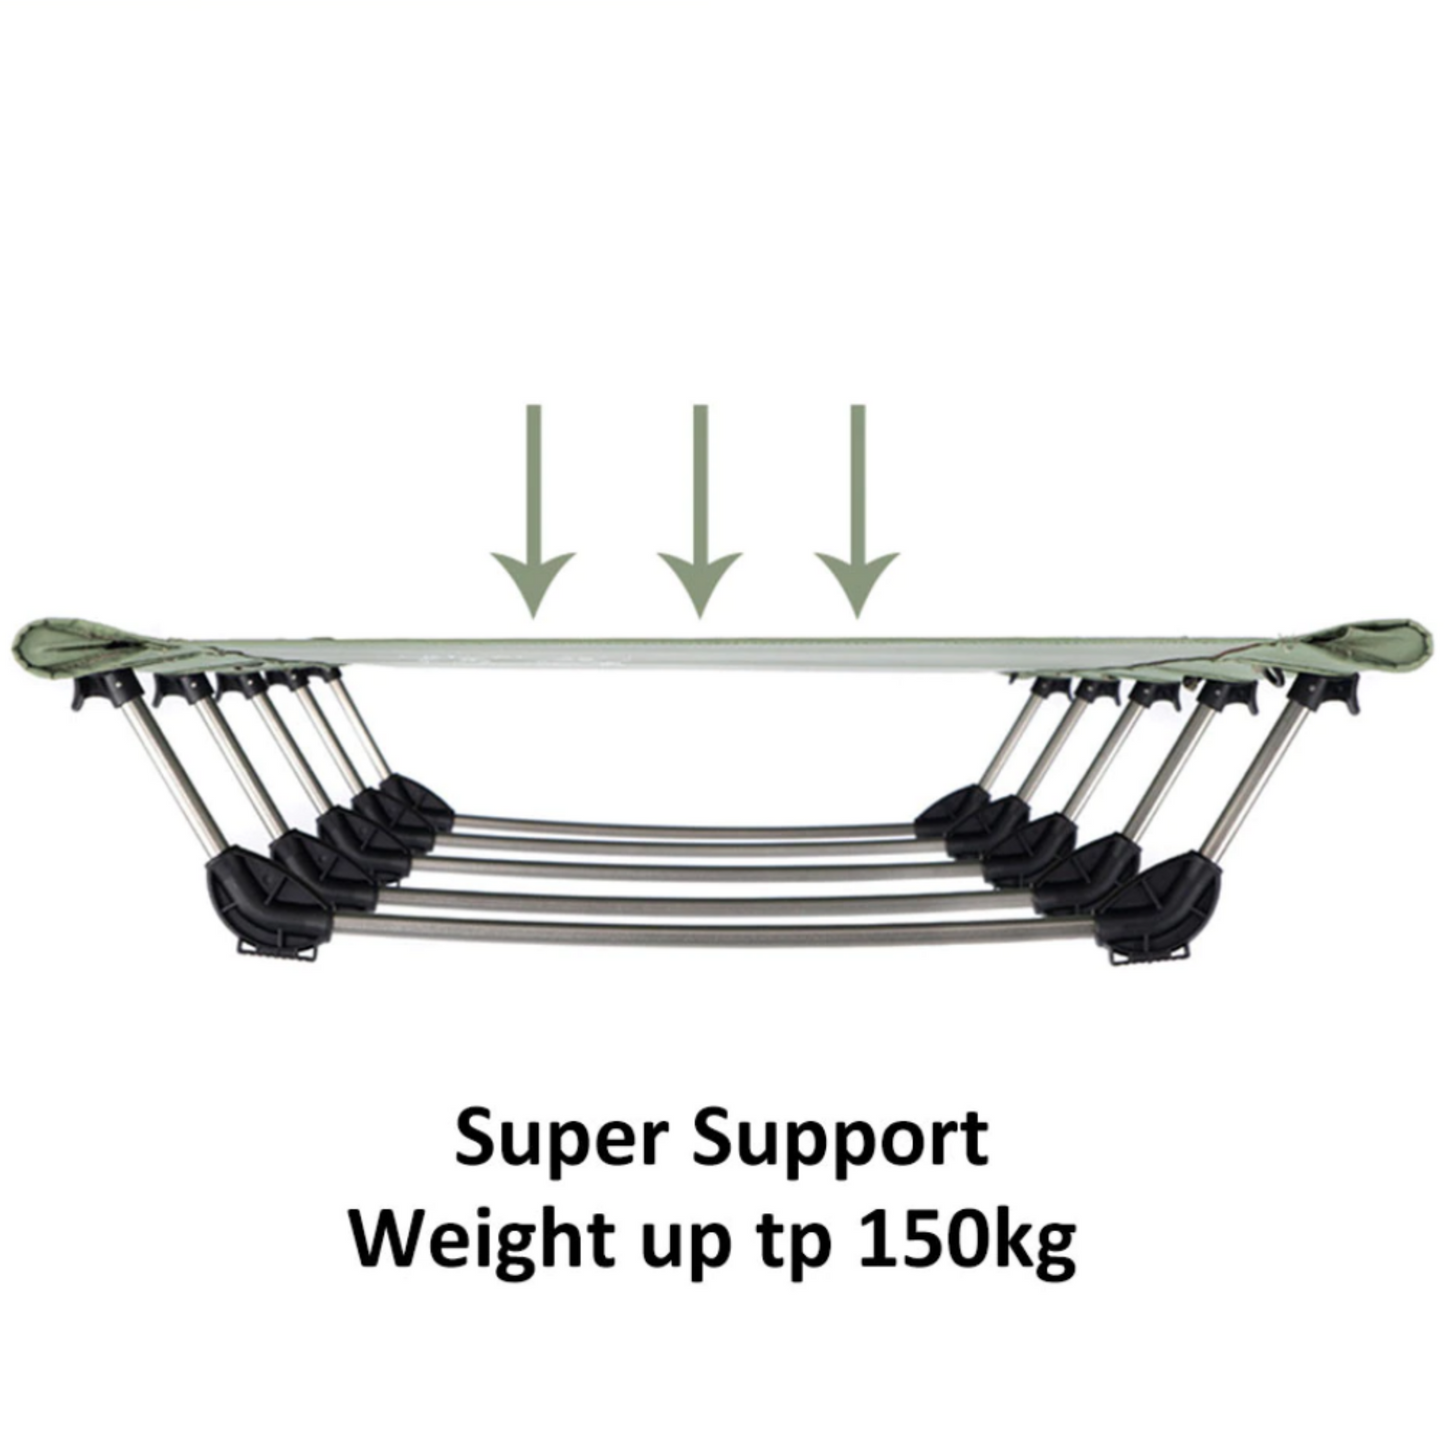 Portable Cot for camping with durable construction - Super Support Weight up to 330lbs